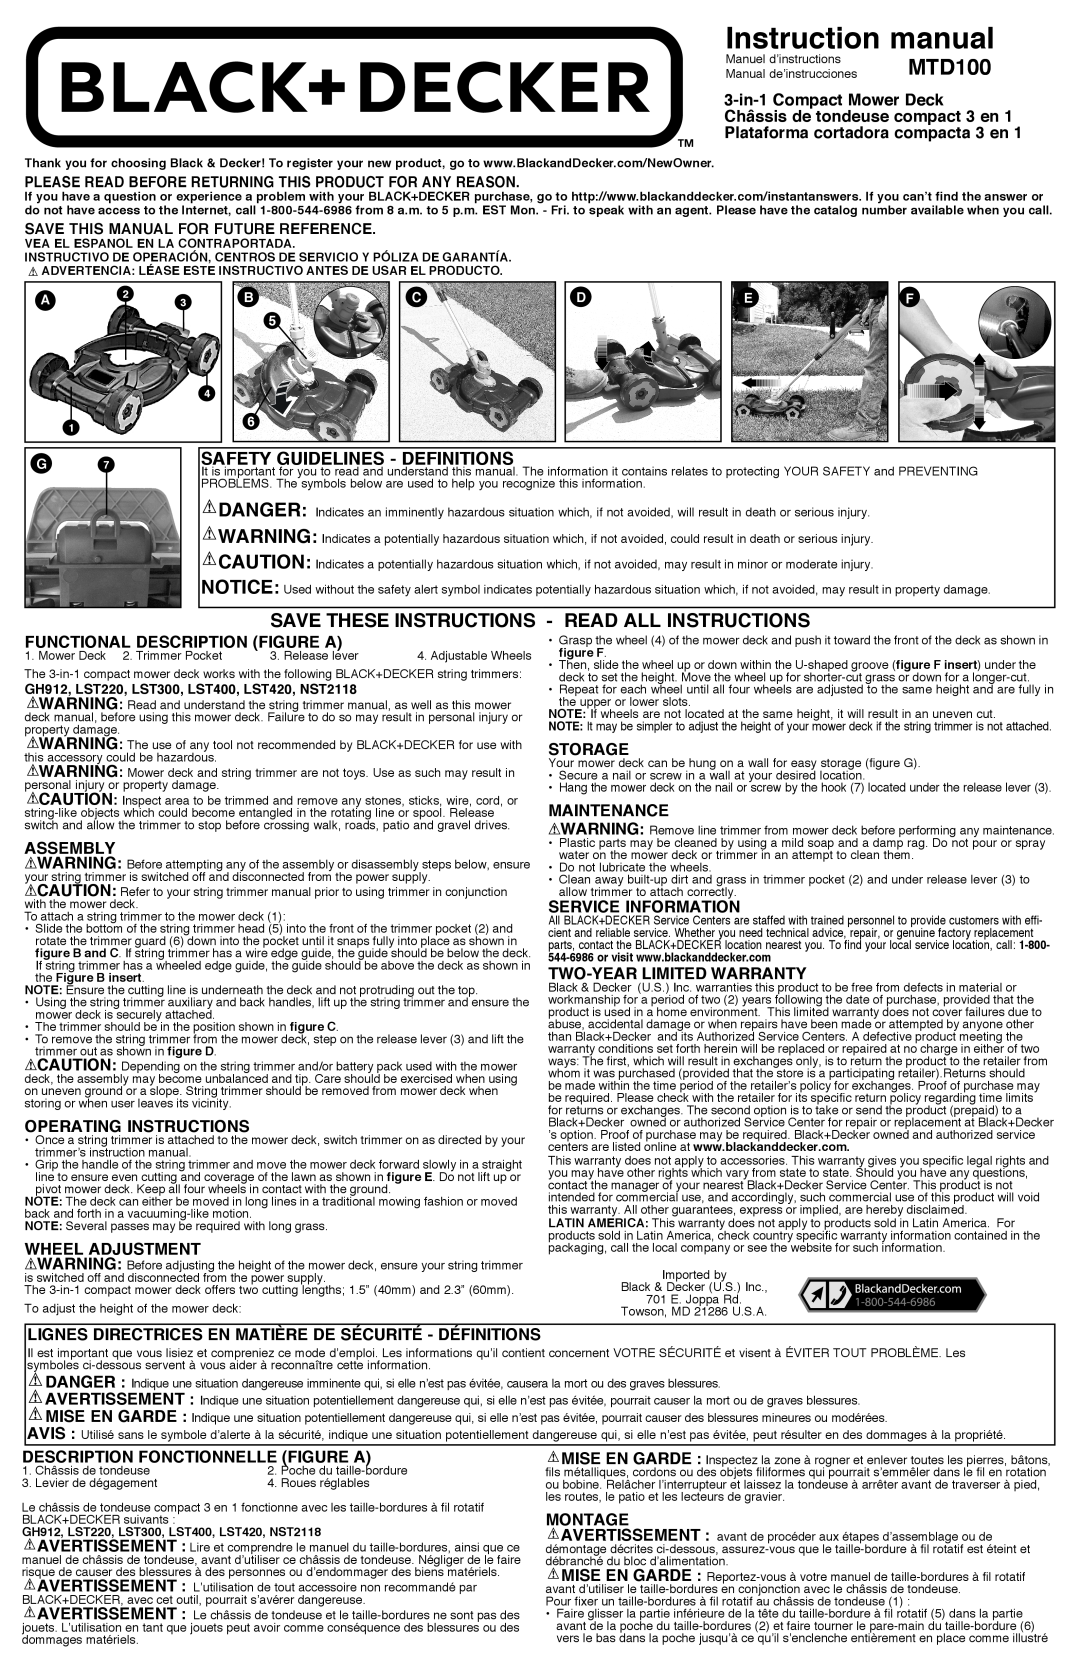 Black & Decker MTD100 operating instructions Safety Guidelines - Definitions, Instruction manual 